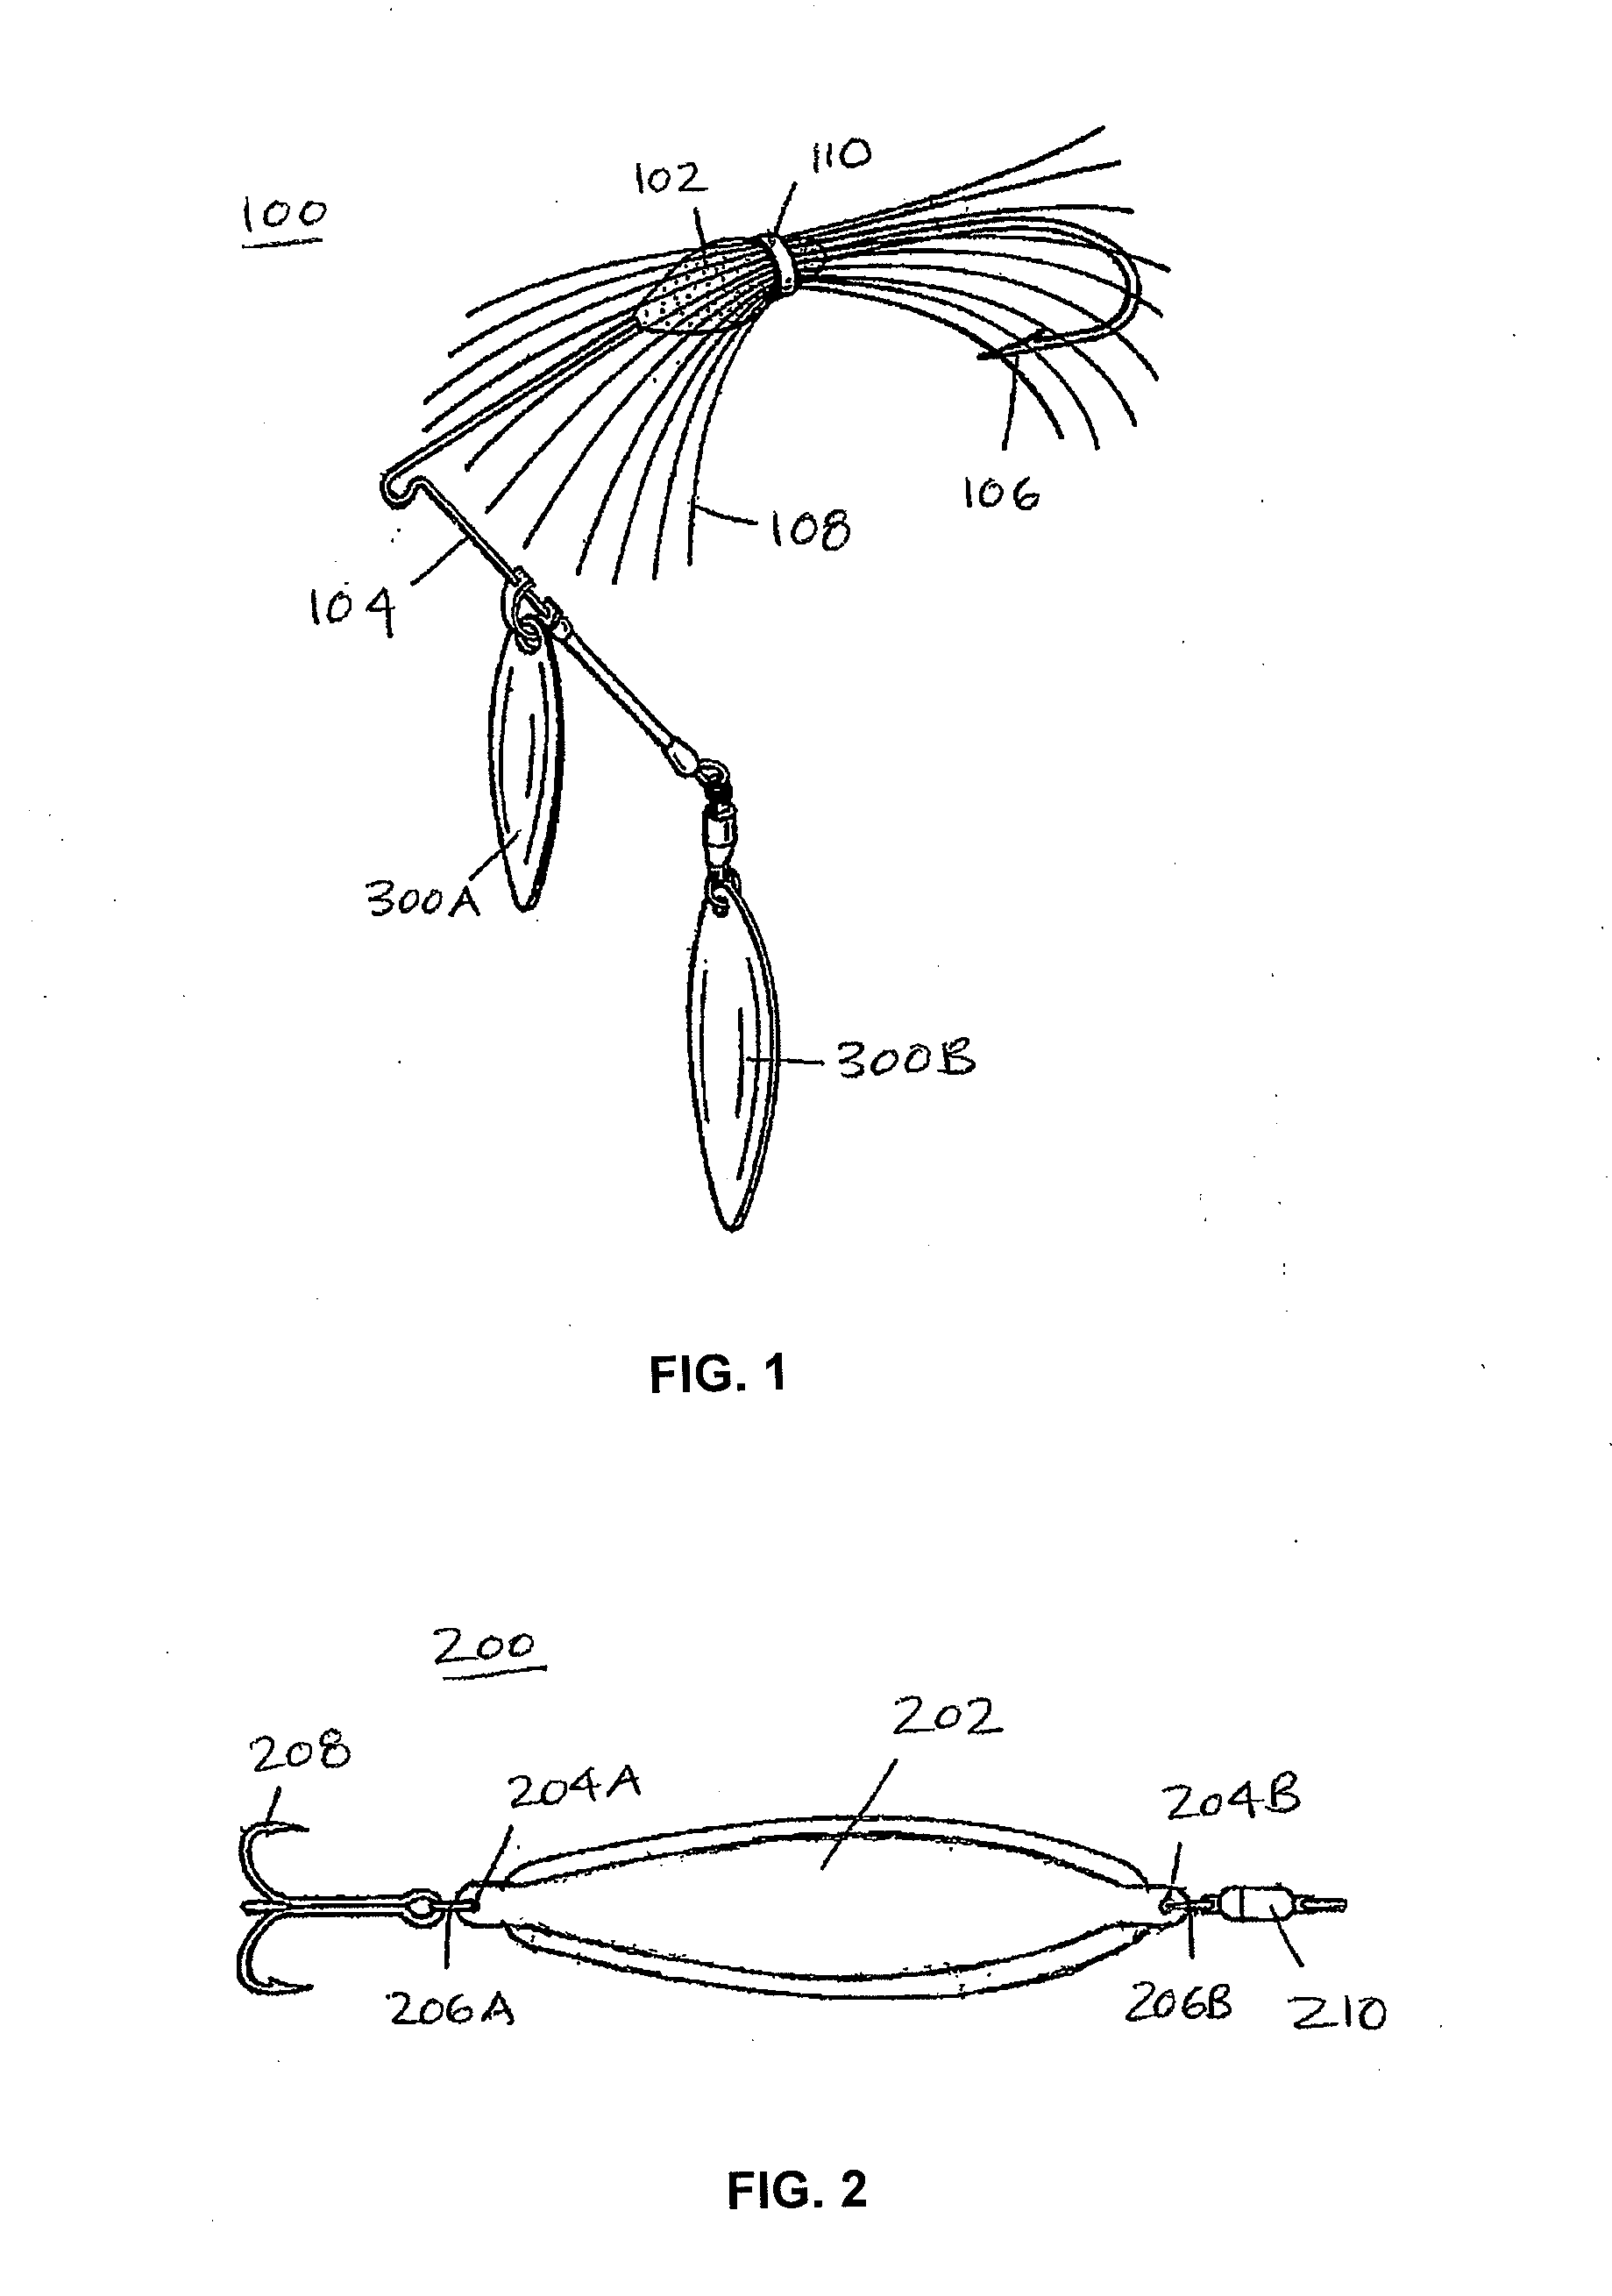 Fishing Lure and Attractors and Methods of Manufacture